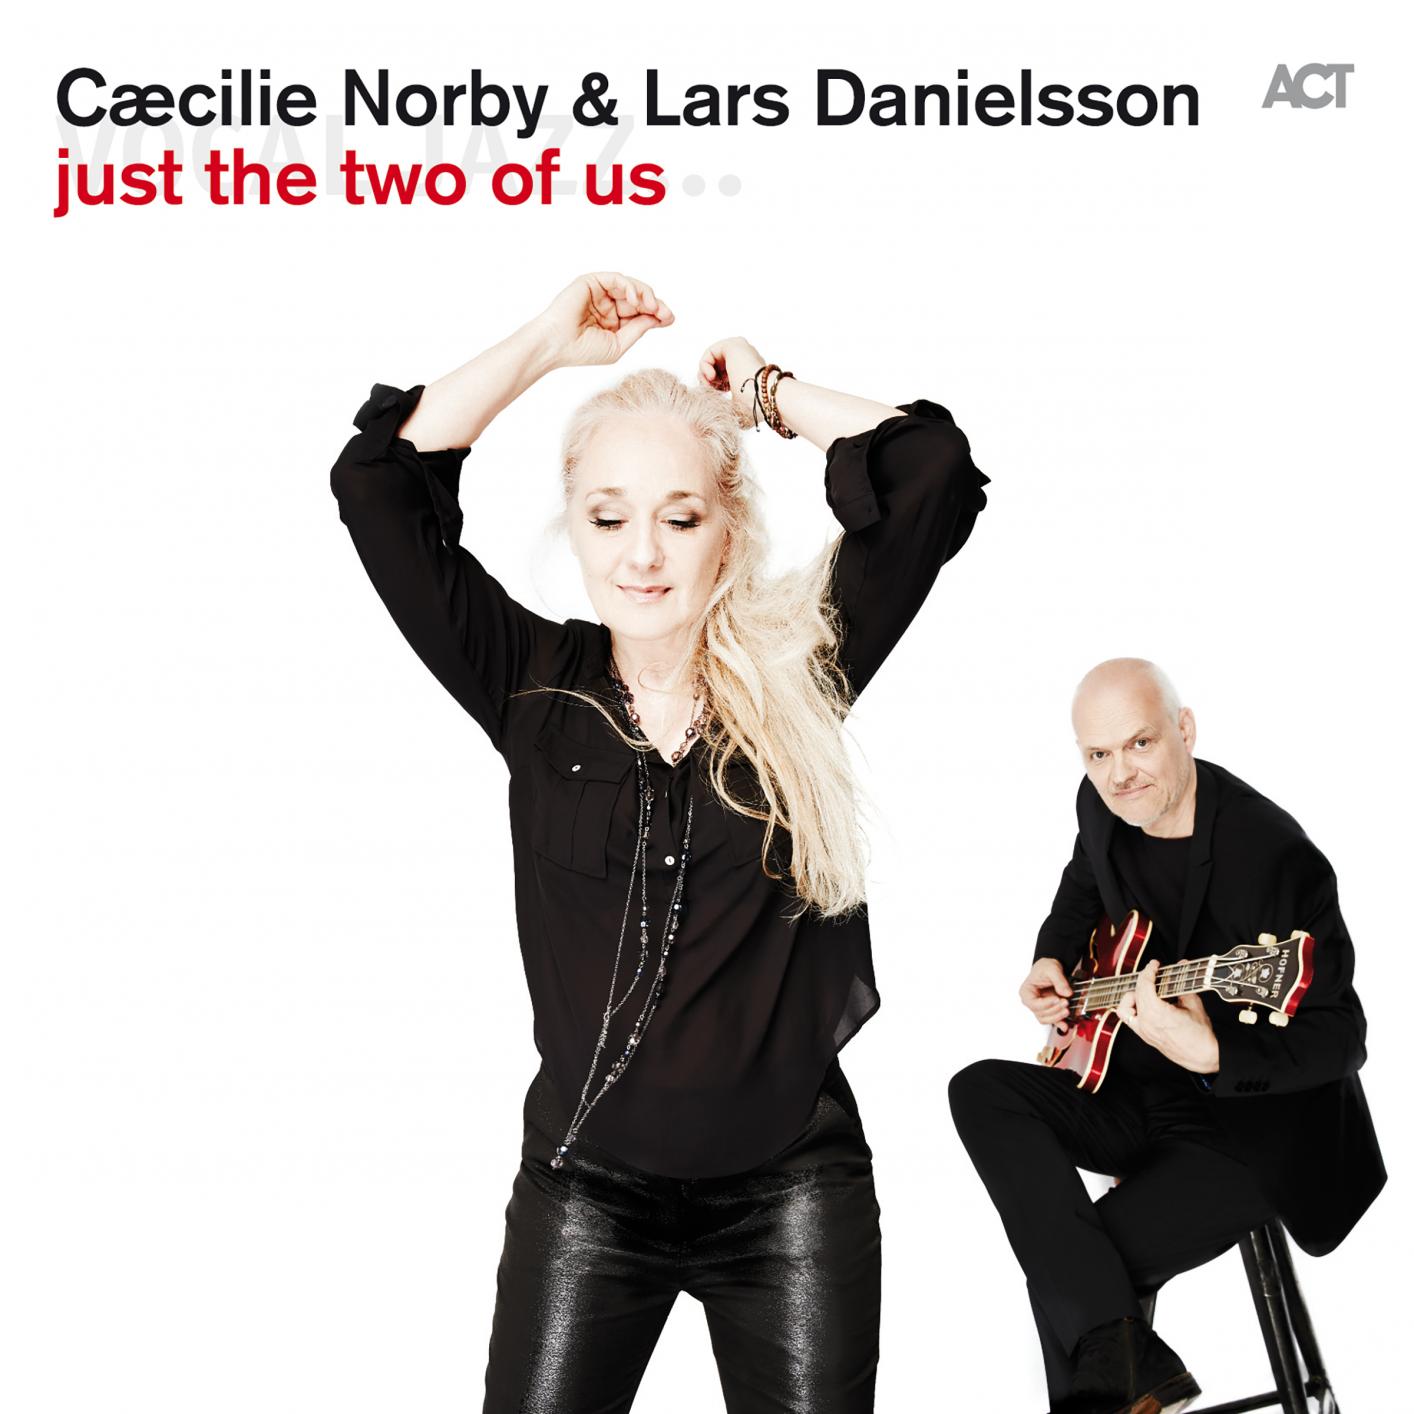 Caecilie Norby & Lars Danielsson - Just the Two of Us (2015) [FLAC 24bit/96kHz]